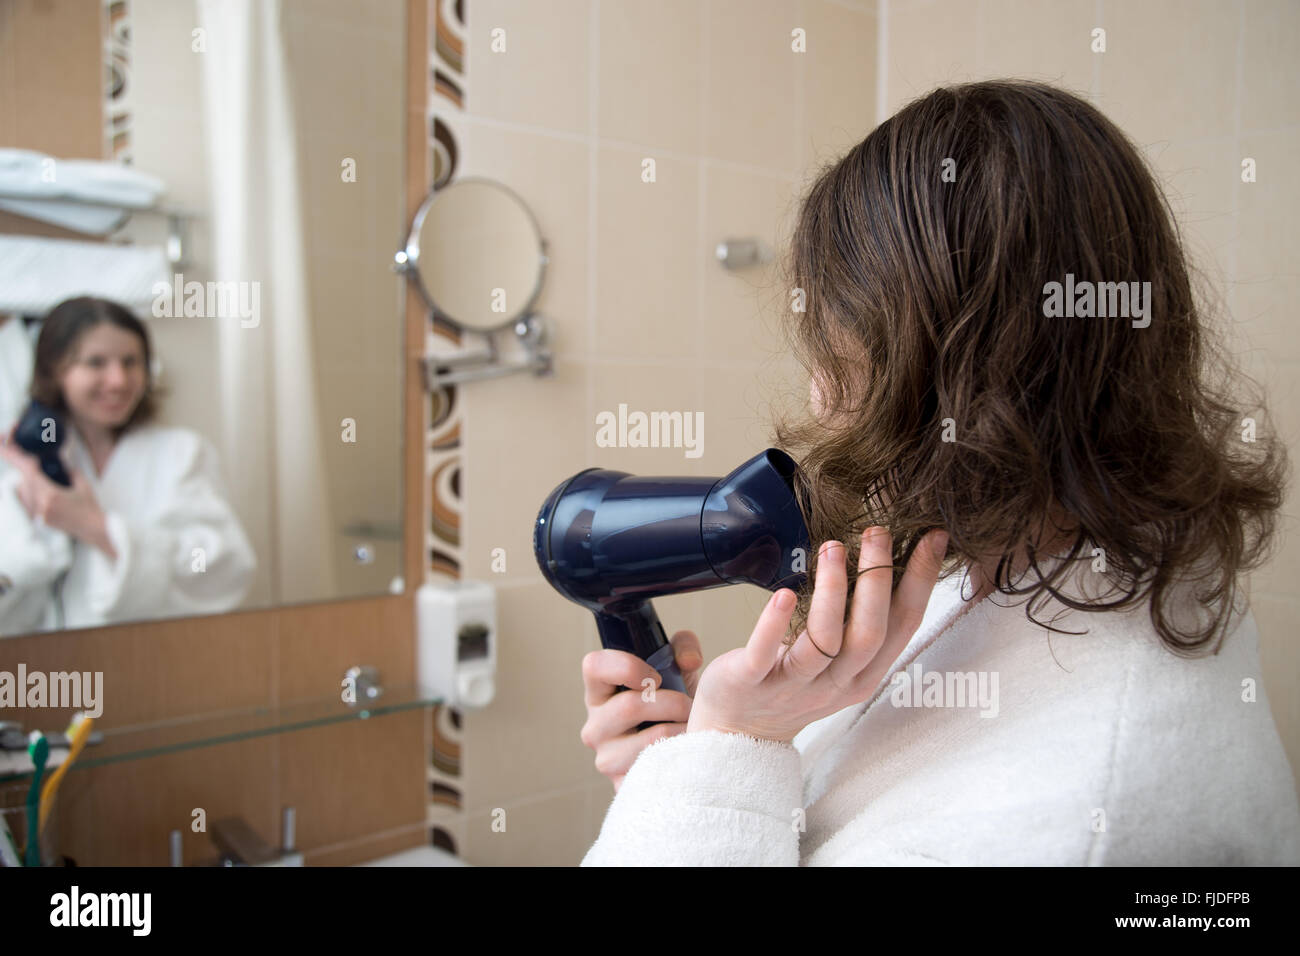 Portrait of young happy smiling woman wearing white bathrobe using hair dryer in bathroom, getting ready, drying her hair Stock Photo